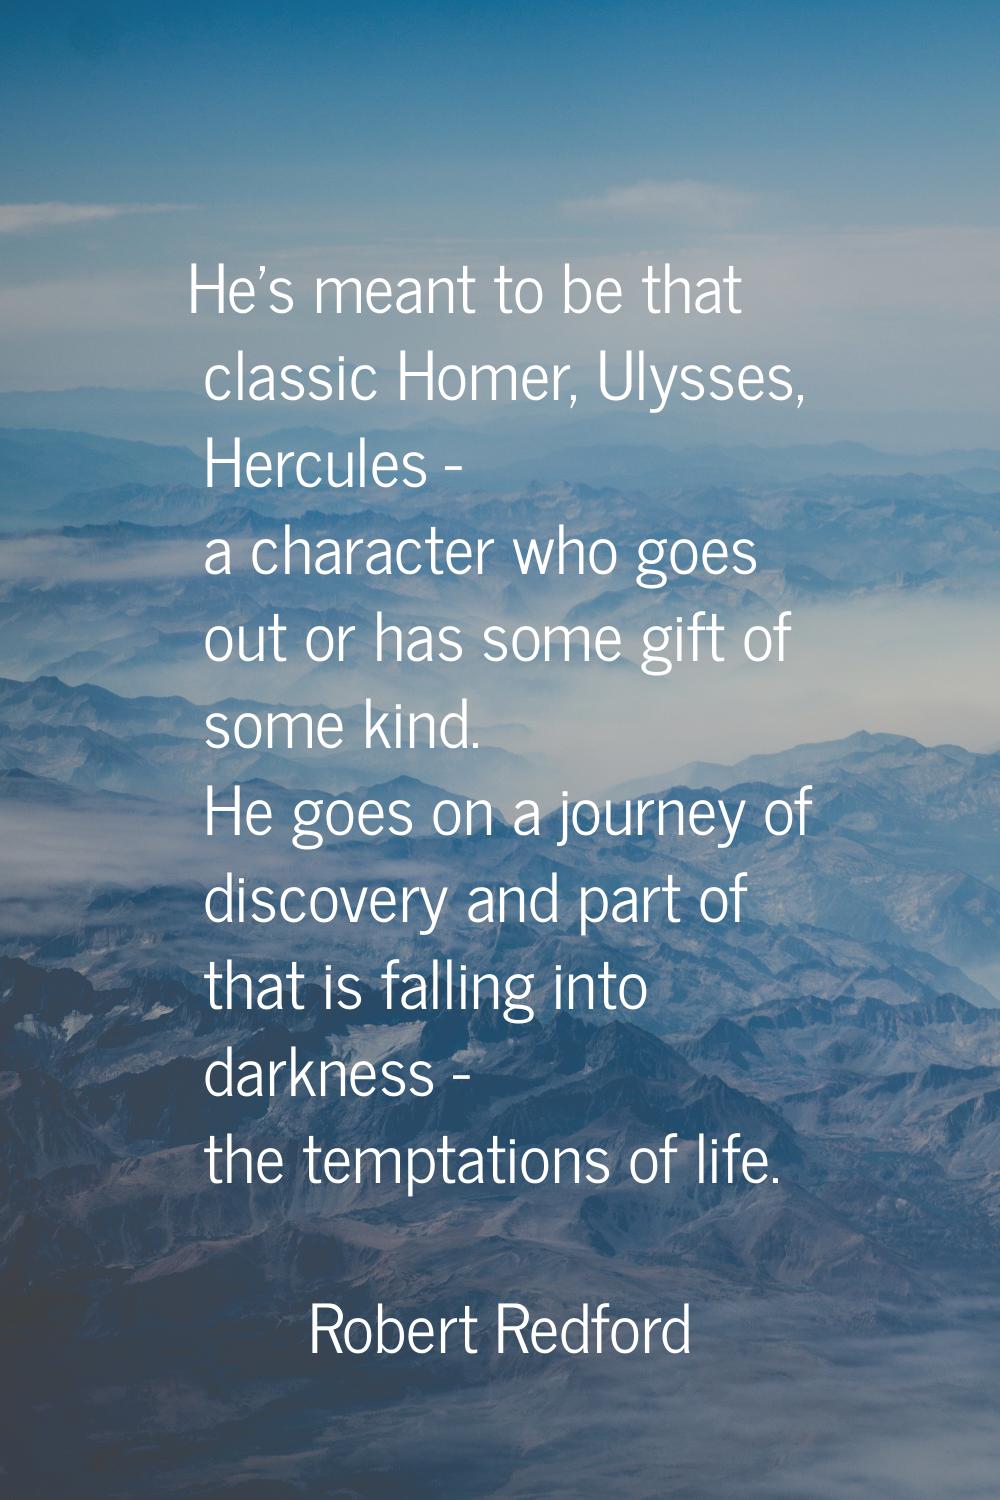 He's meant to be that classic Homer, Ulysses, Hercules - a character who goes out or has some gift 